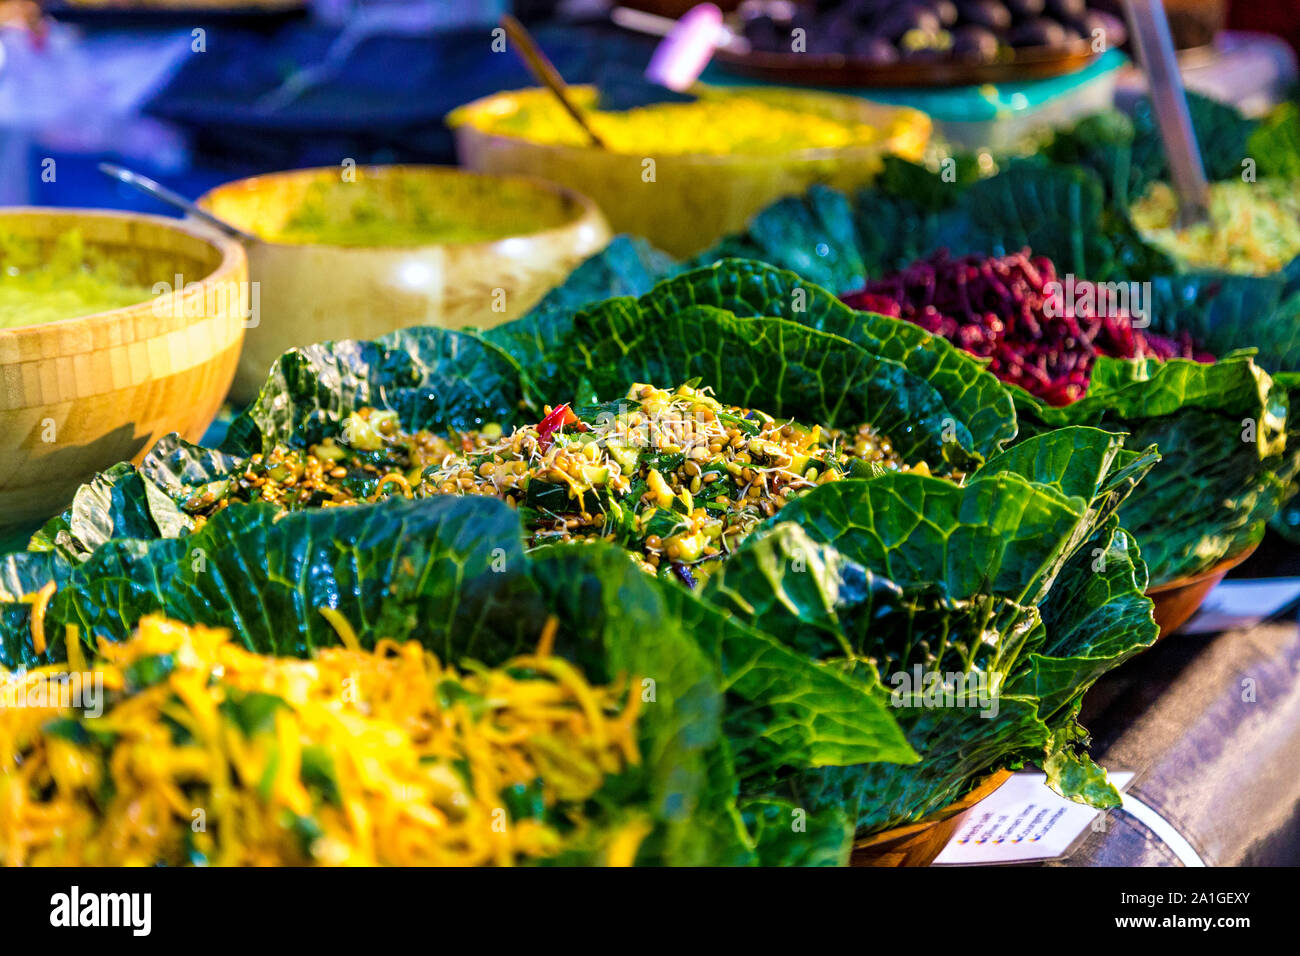 Healthy salads in cabbage leaves at Black Food Festival, London, UK Stock Photo